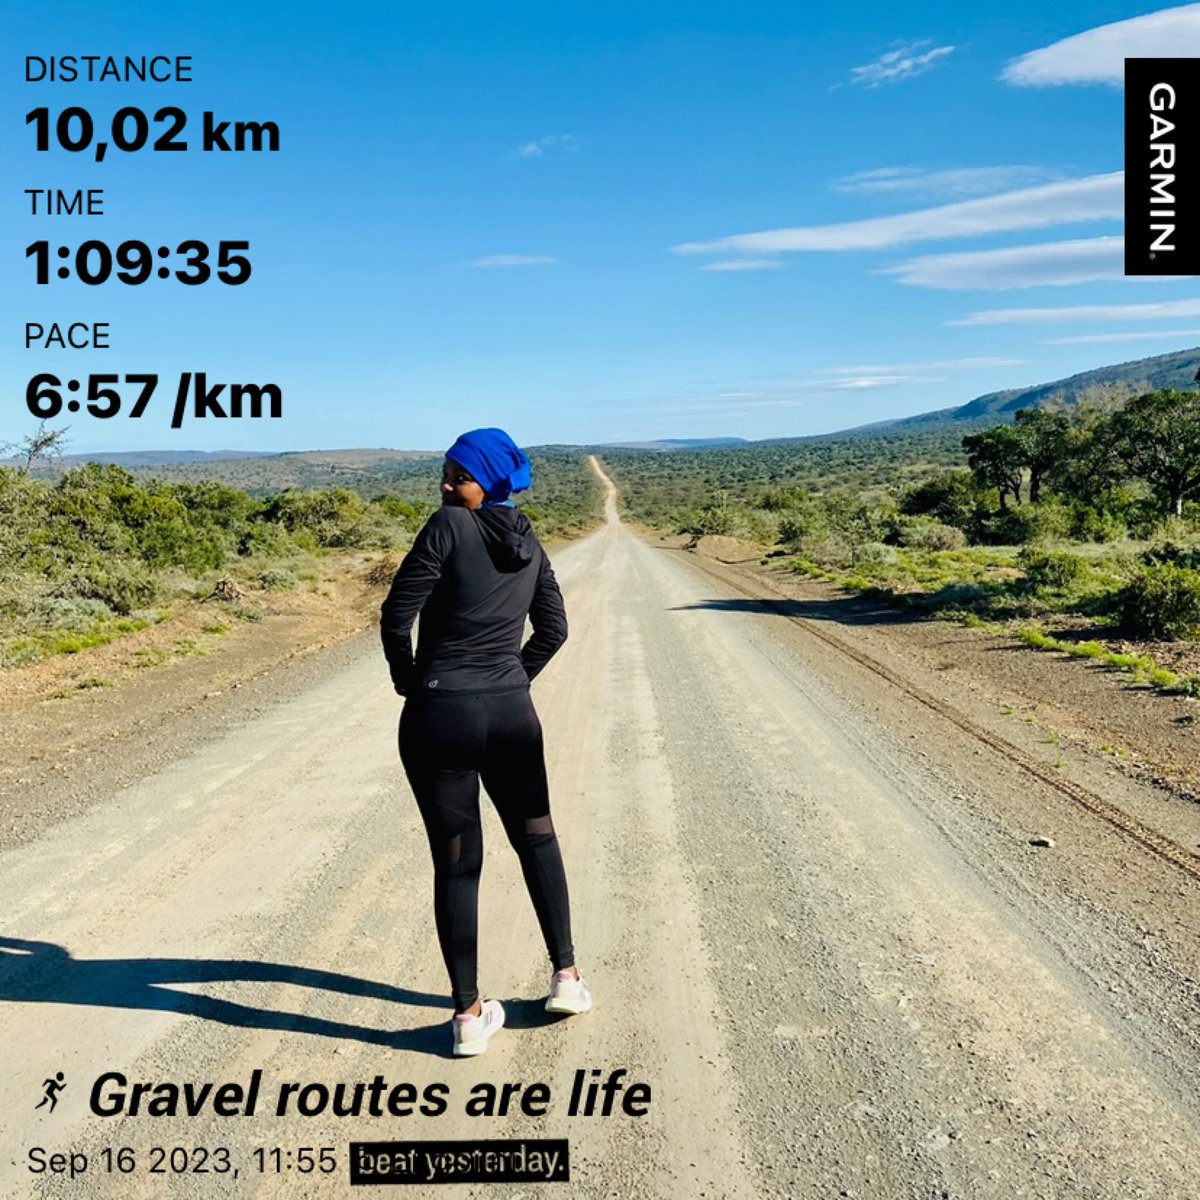 10 km is better than nothing! 🥹 
#RunningWithSoleAC #IPaintedMyRun #FetchYourBody2023 #TrapnLos #BeatYesterday #BudgetInsurancexRunningWithSoleAC #EasyPace #Lifeofarunner